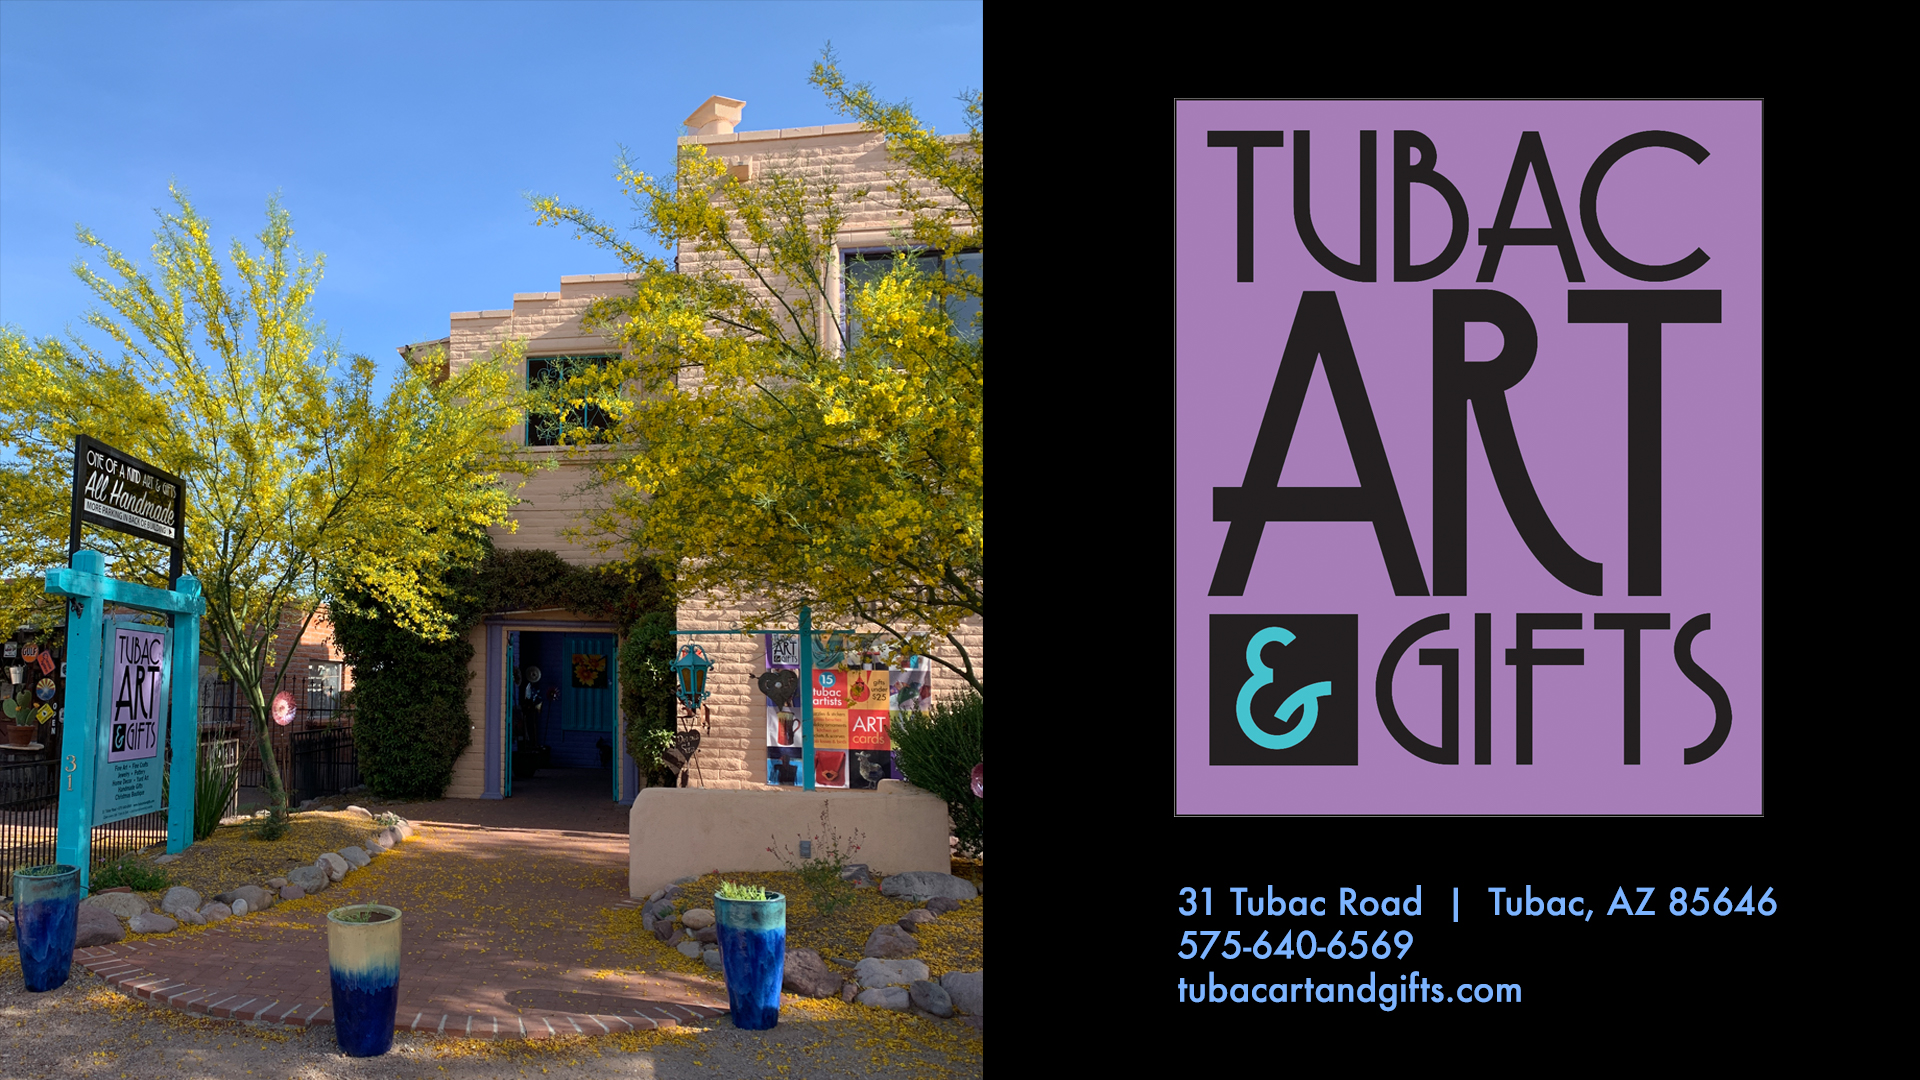 Tubac Art and Gifts gallery and gift shop in Tubac Arizona